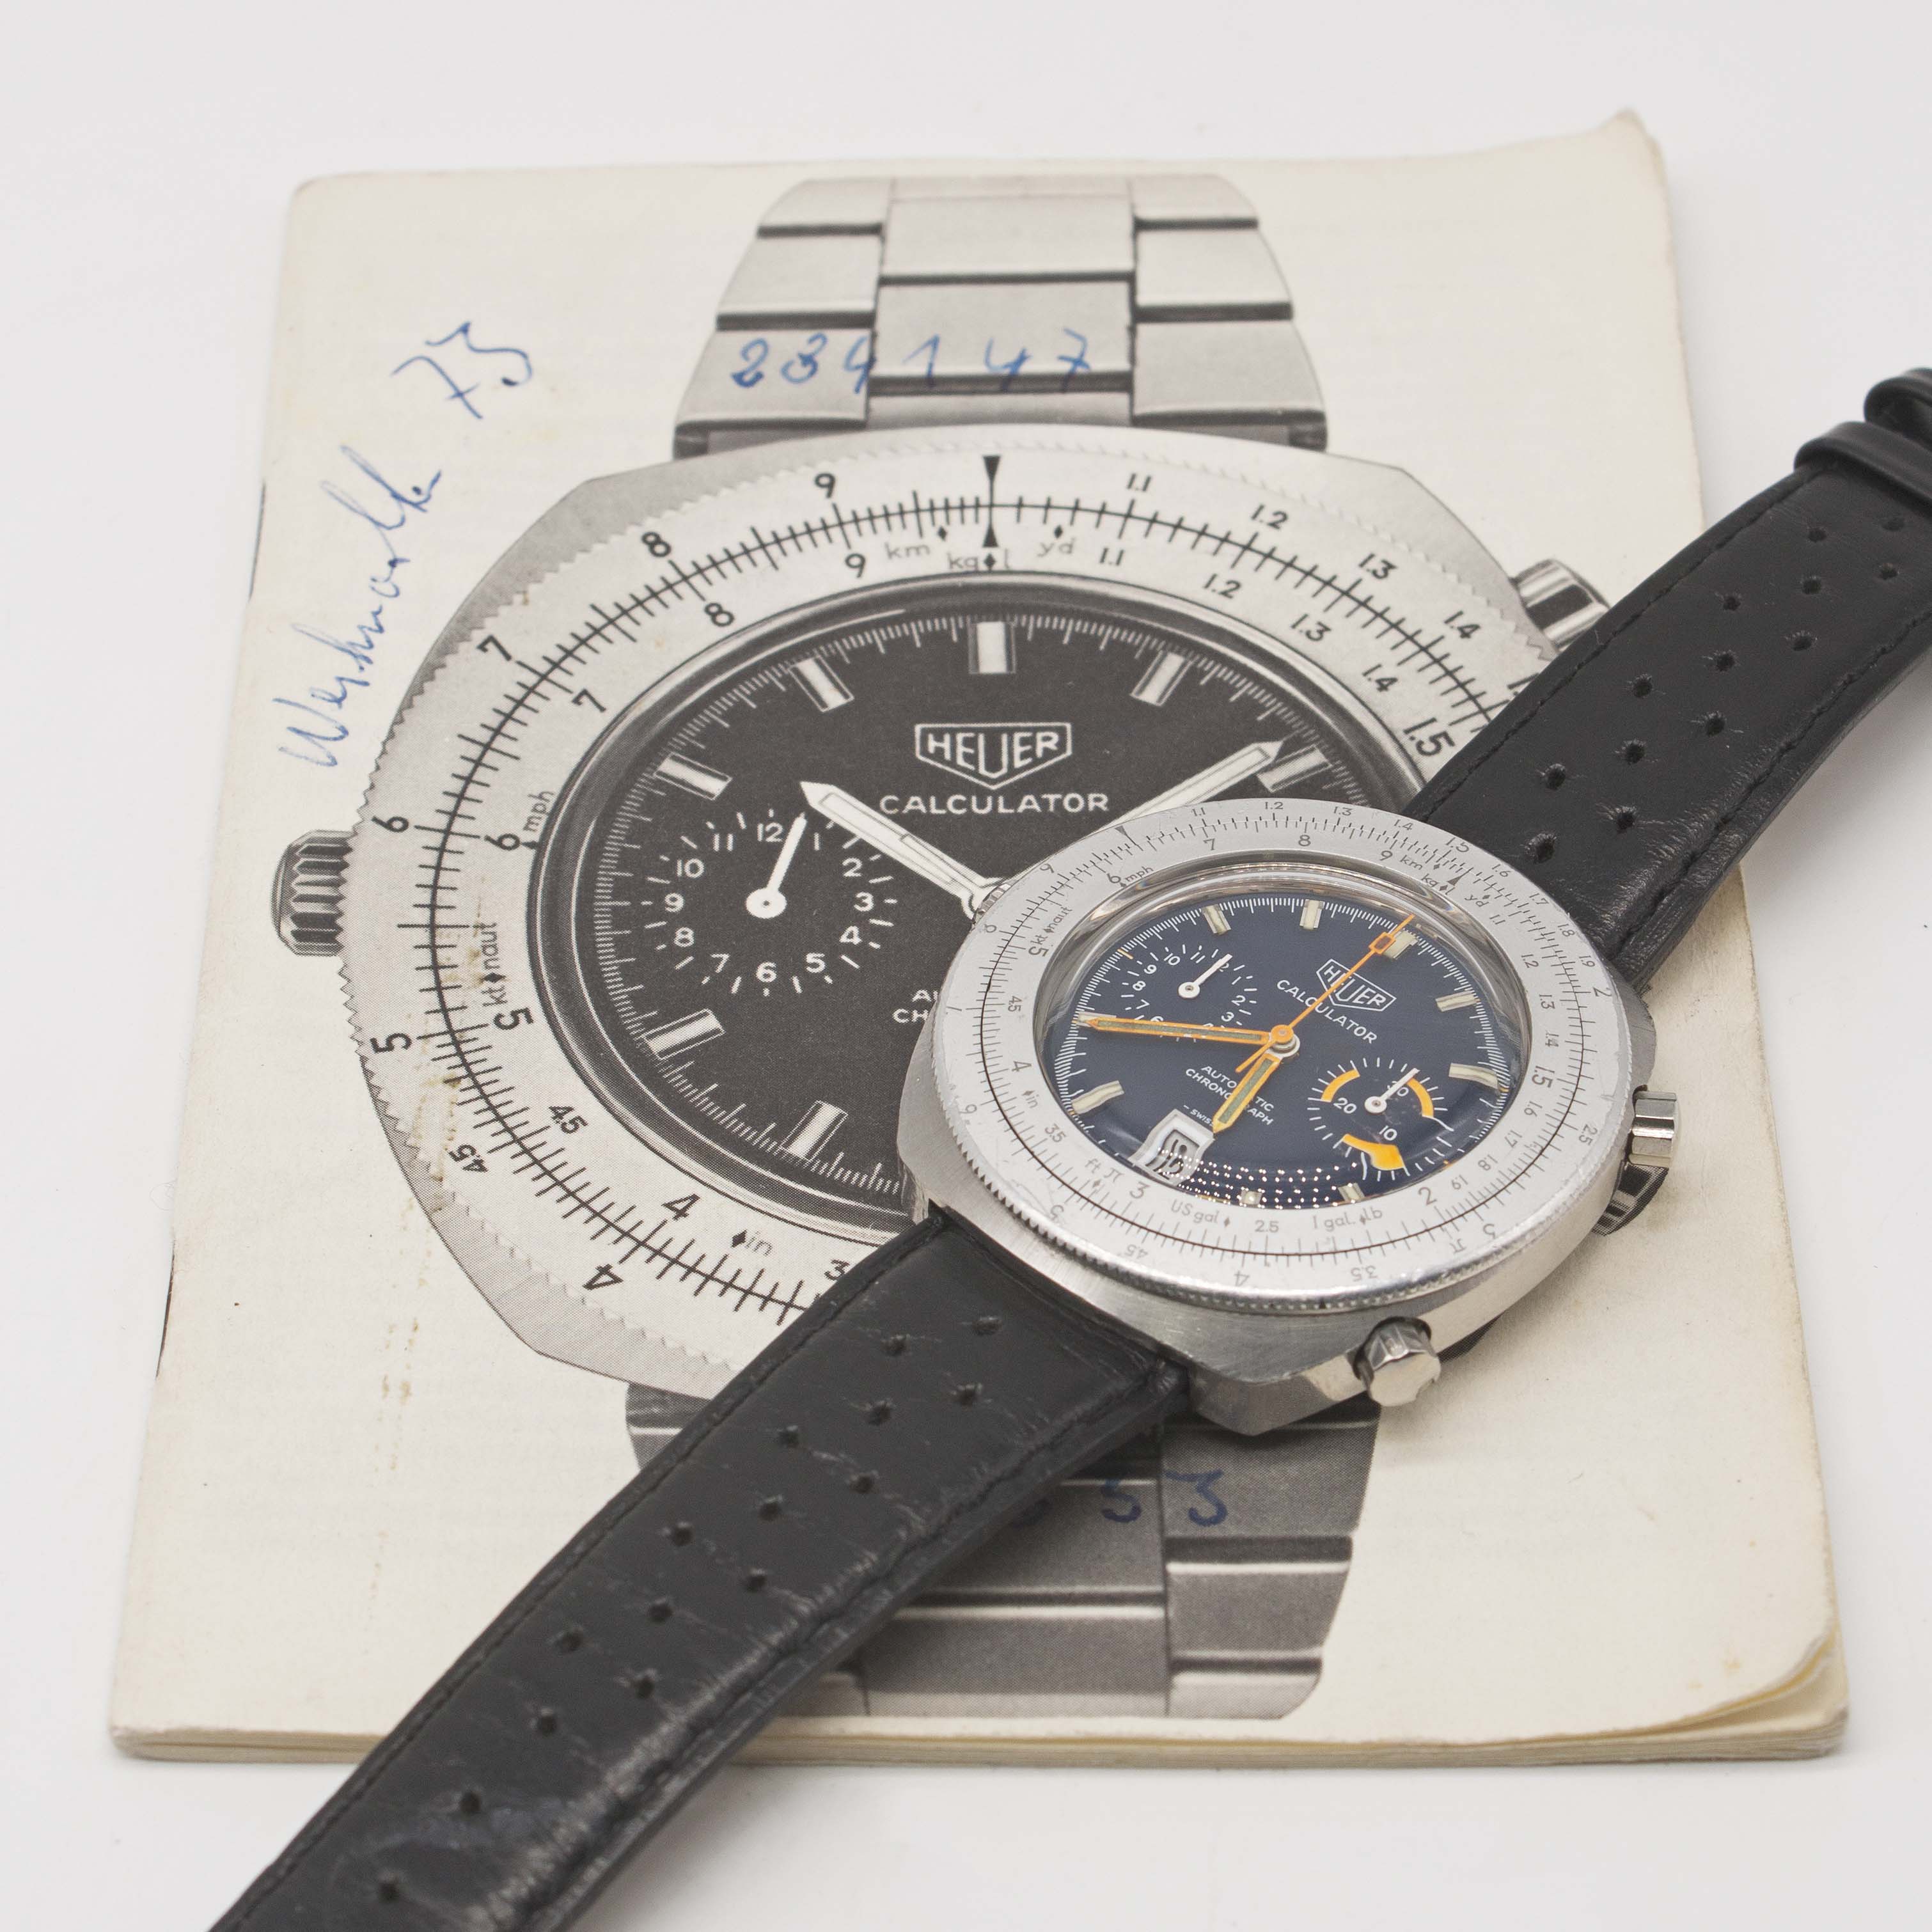 A GENTLEMAN'S STAINLESS STEEL HEUER CALCULATOR AUTOMATIC CHRONOGRAPH WRIST WATCH CIRCA 1970s, REF. - Image 5 of 5